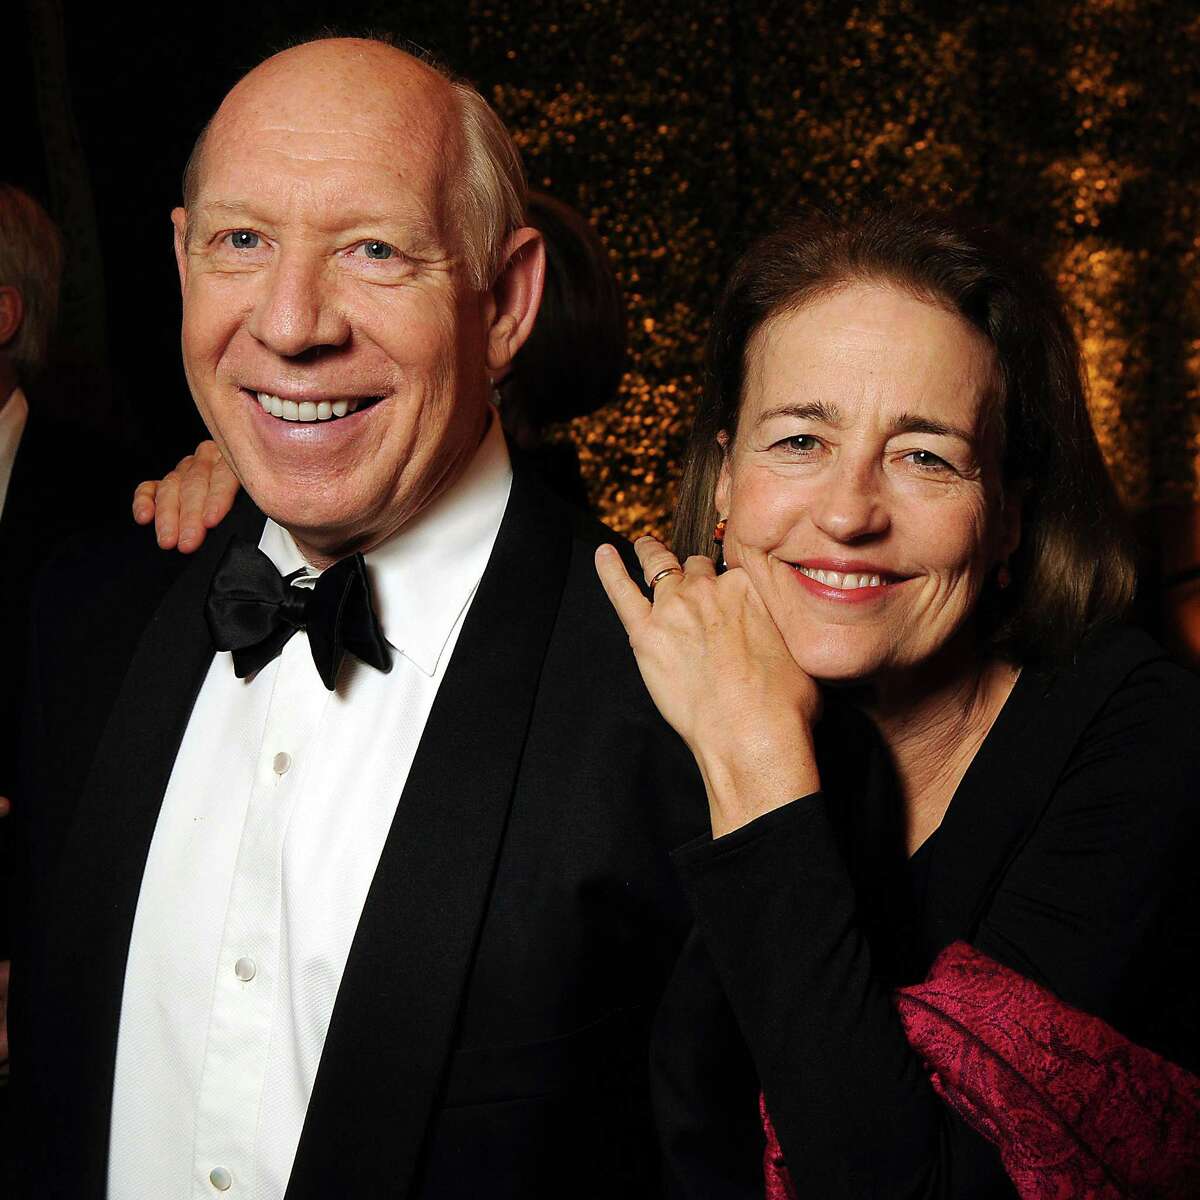 Former Houston Mayor Bill White, pictured with wife Andrea, has written "America's Fiscal Constitution: Its Triumph and Collapse," a book about the federal debt.